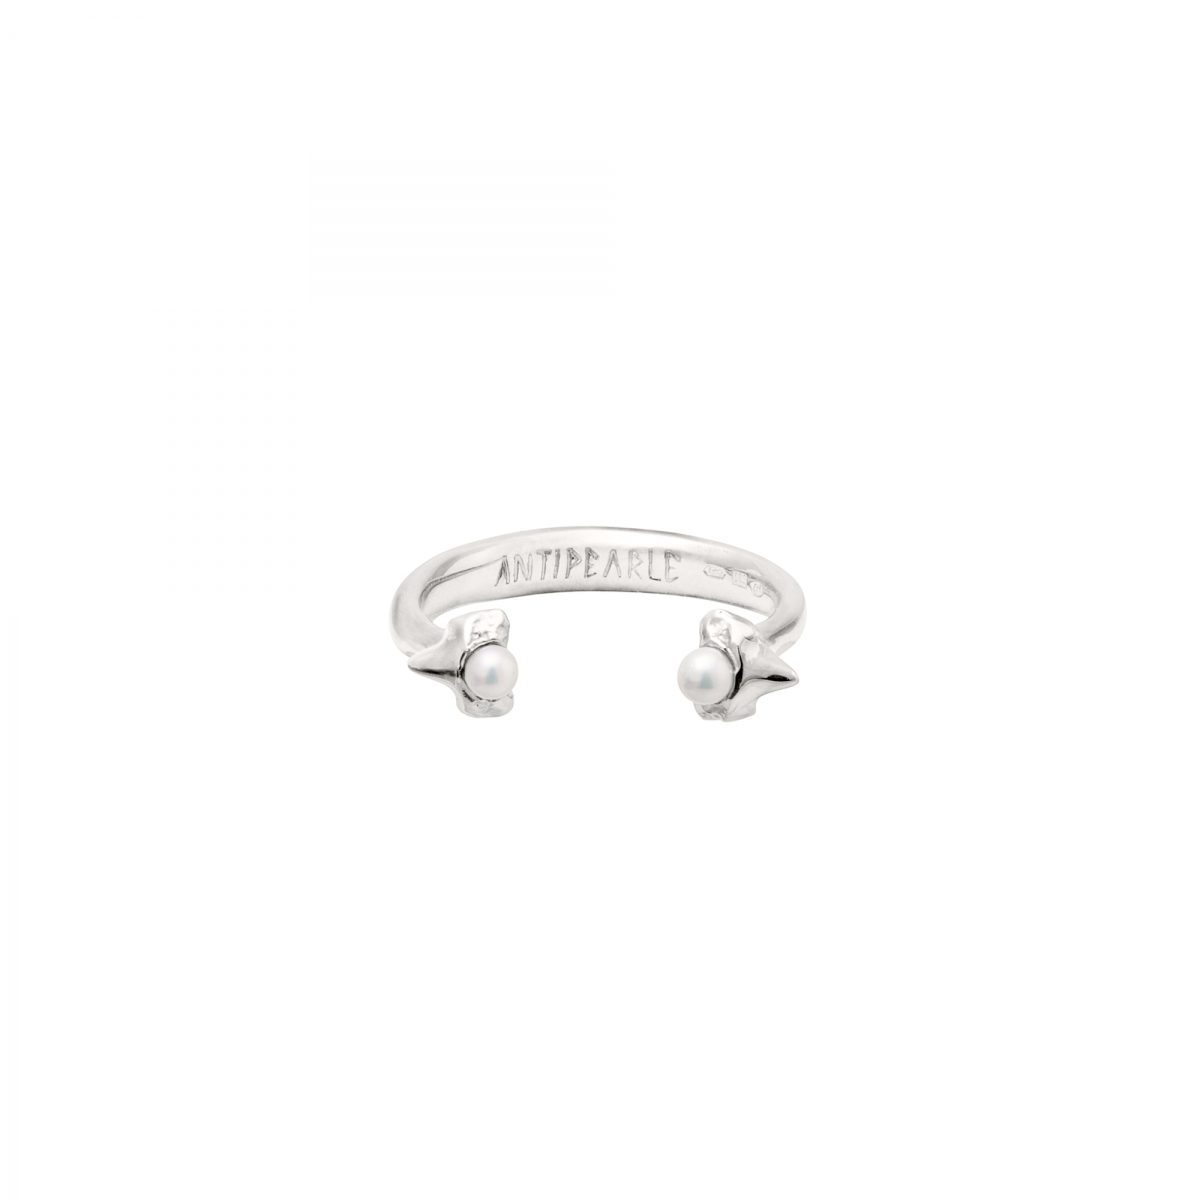 Antipearle Petite A Double Tooth Ring Silver